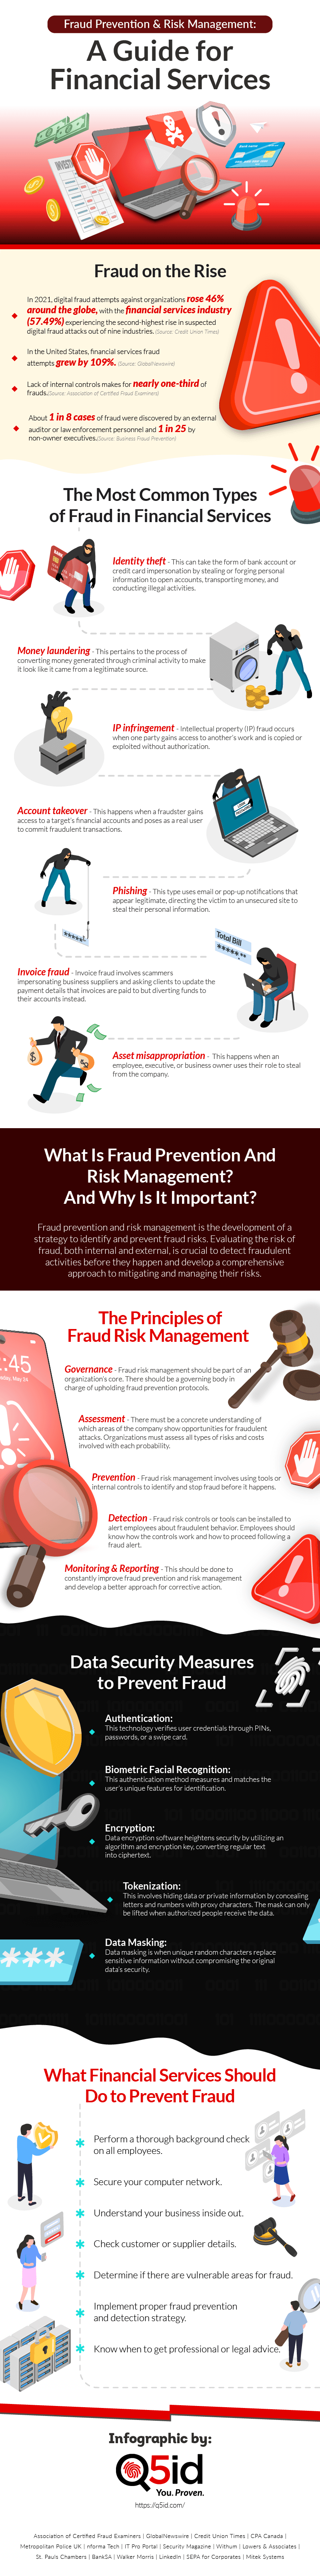 Fraud Prevention & Risk Management: A Guide for Financial Services